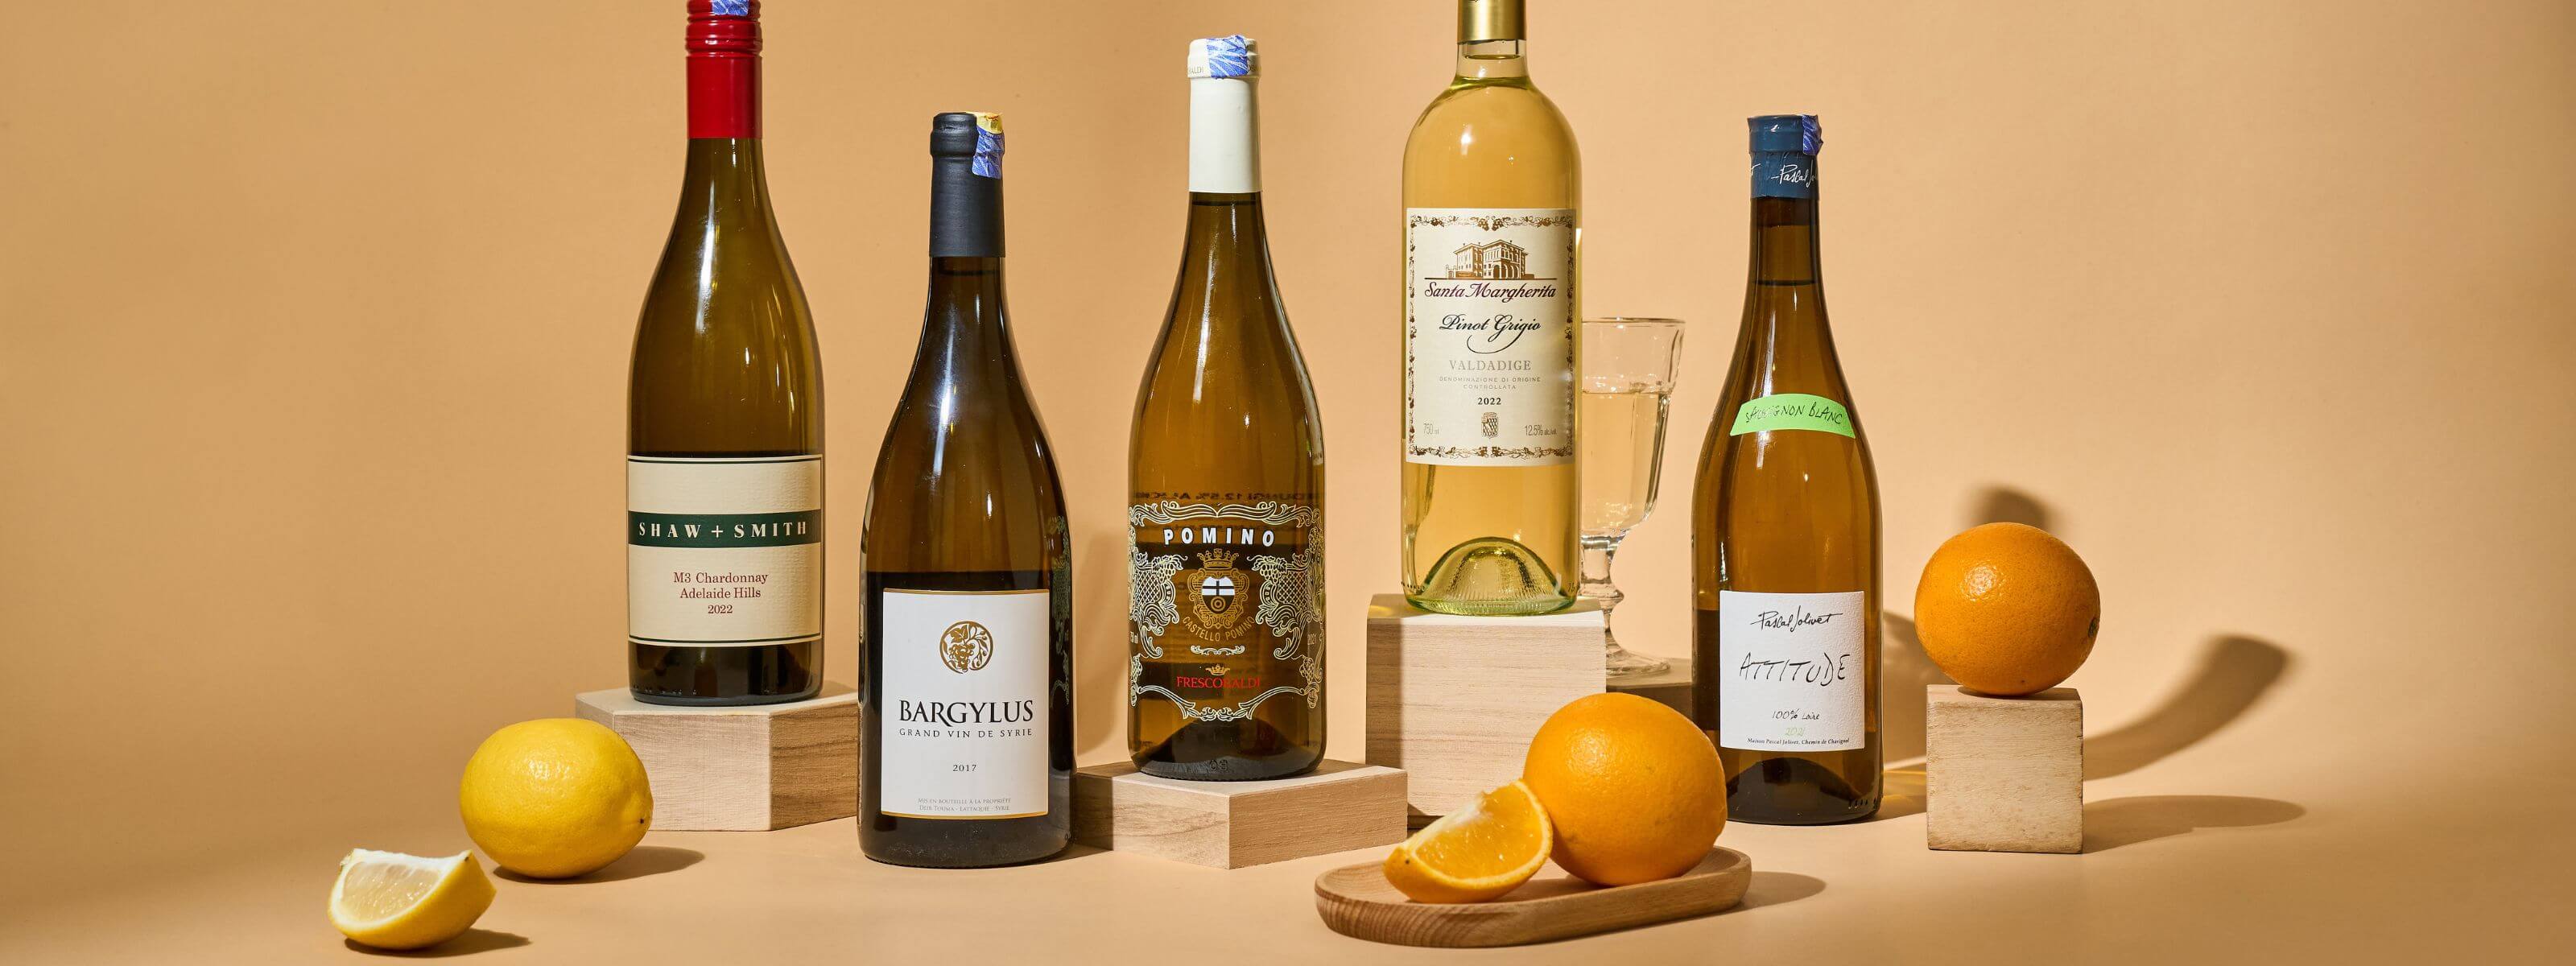 Best white wine deals in Malaysia! Explore our wide selection of white wines, ranging from the old world to the new world.